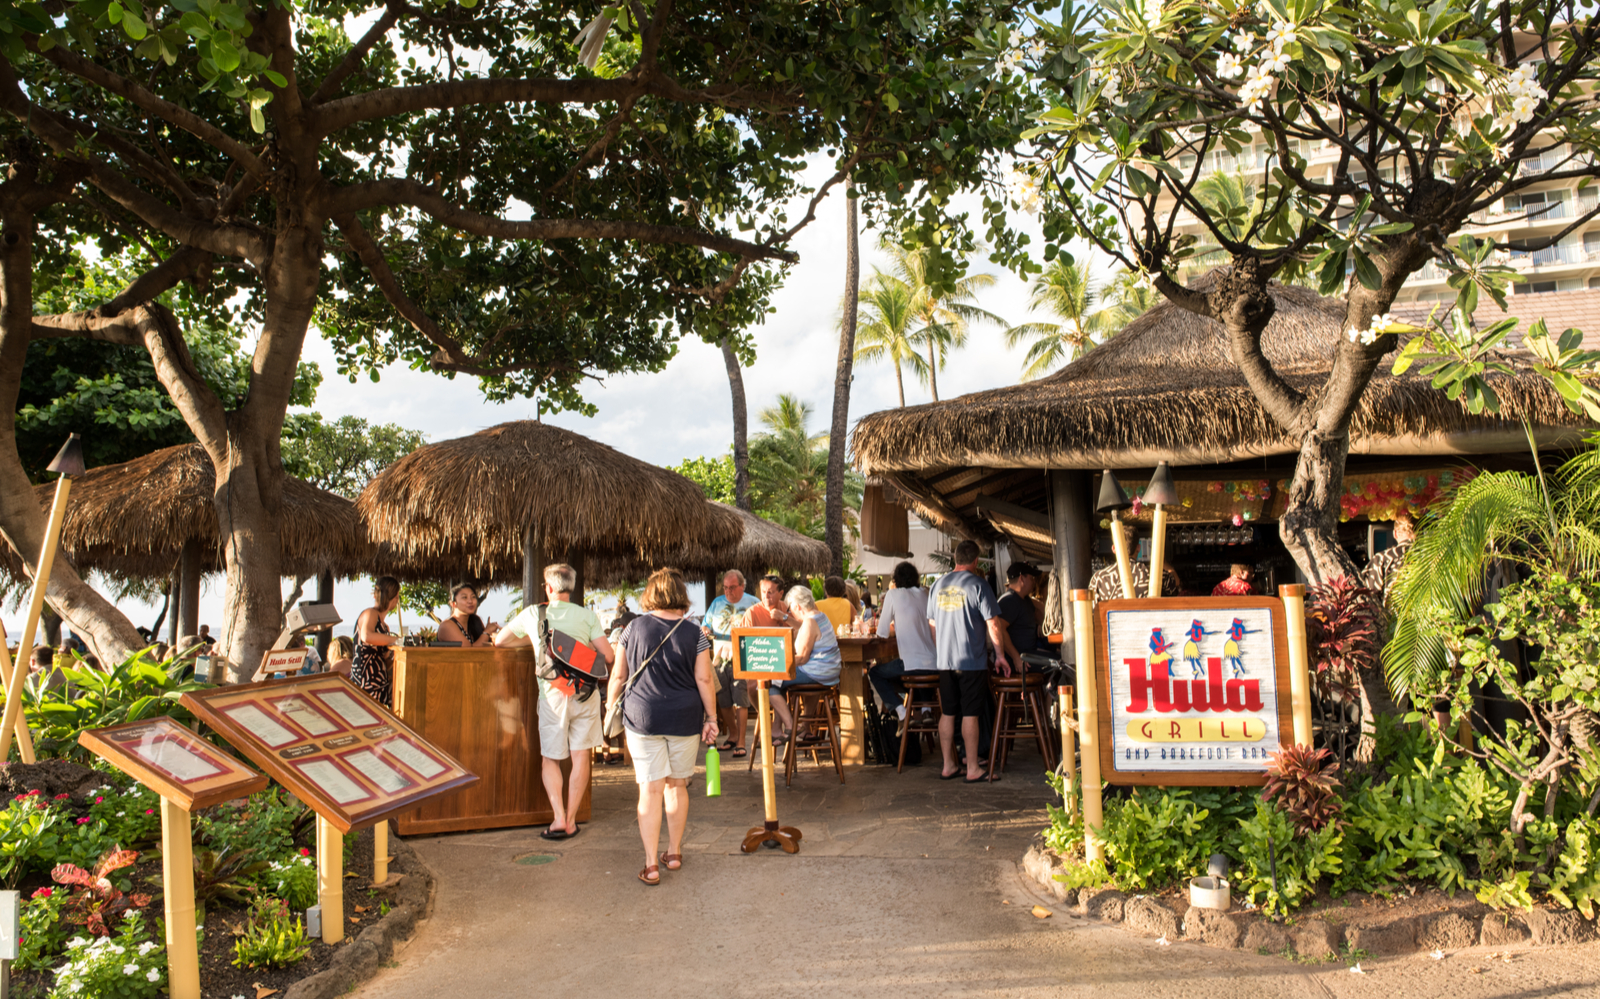 Hula Grill, one of the best restaurants in Maui, pictured at its entrance